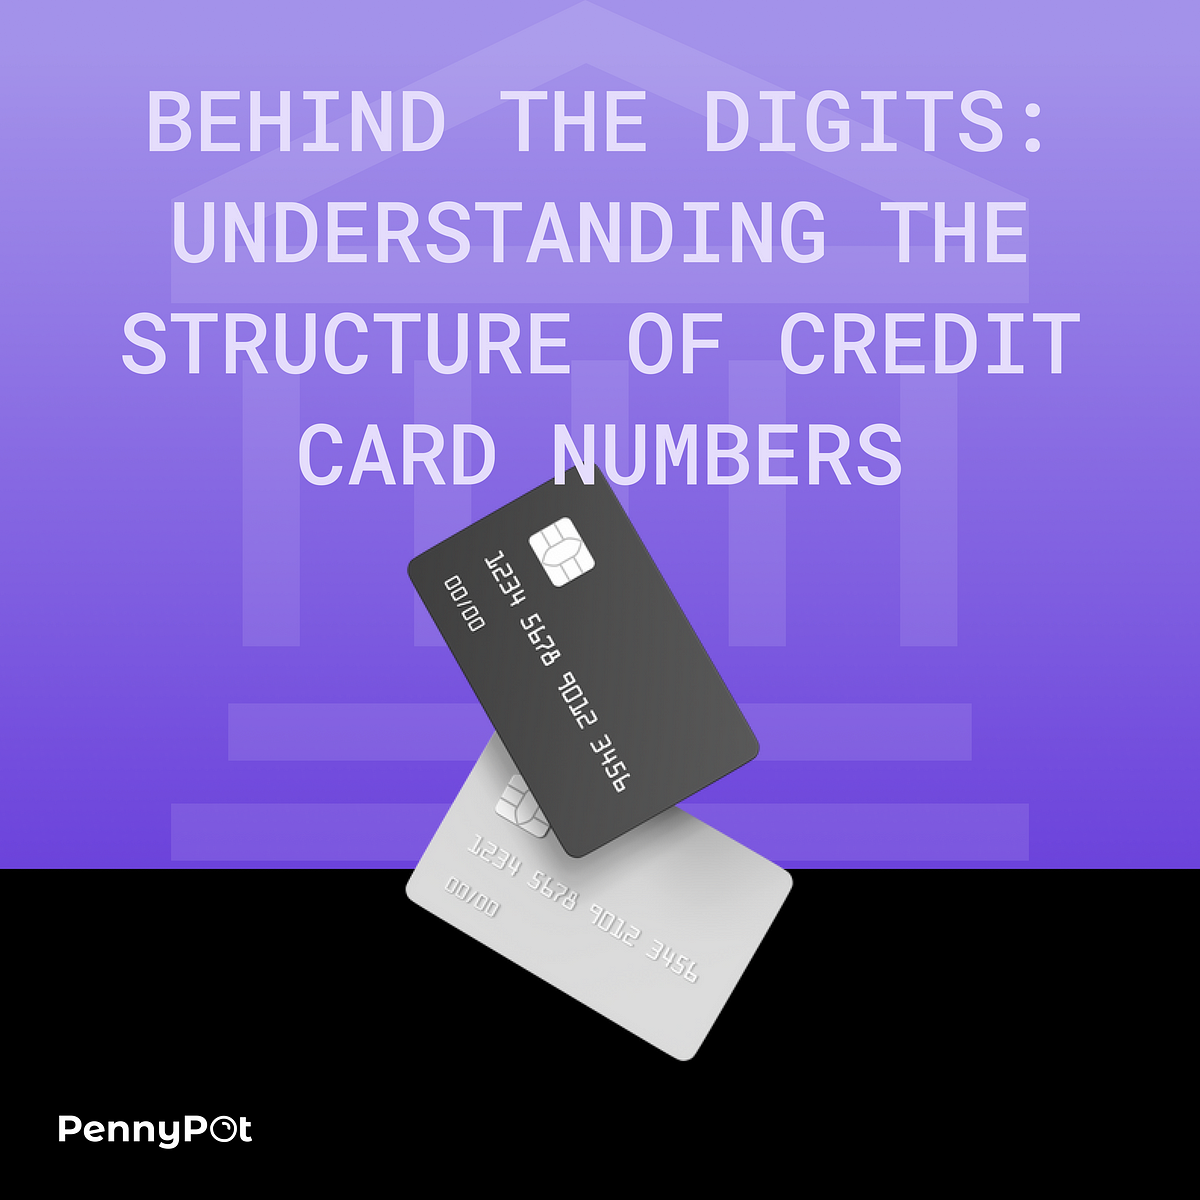 Behind the Digits: Understanding the Structure of Credit Card Numbers ...